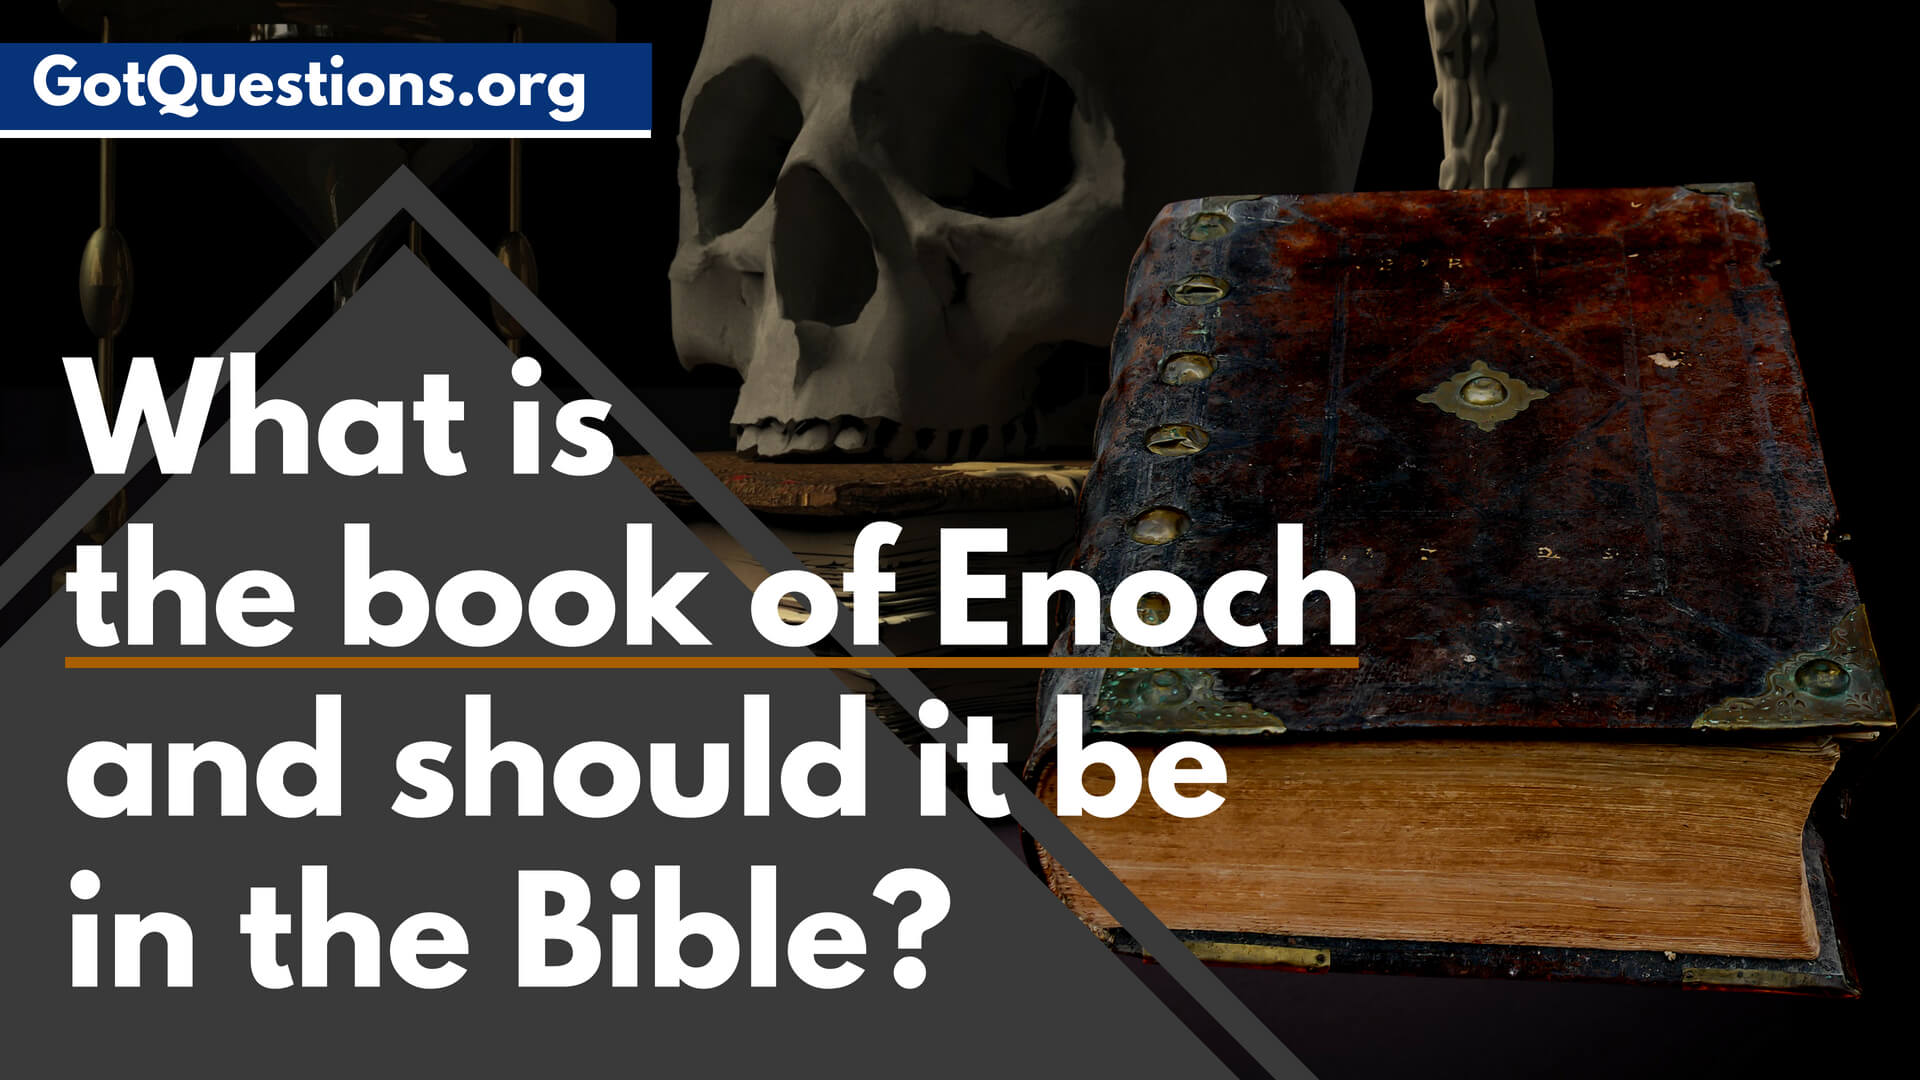 What is the book of Enoch and should it be in the Bible?